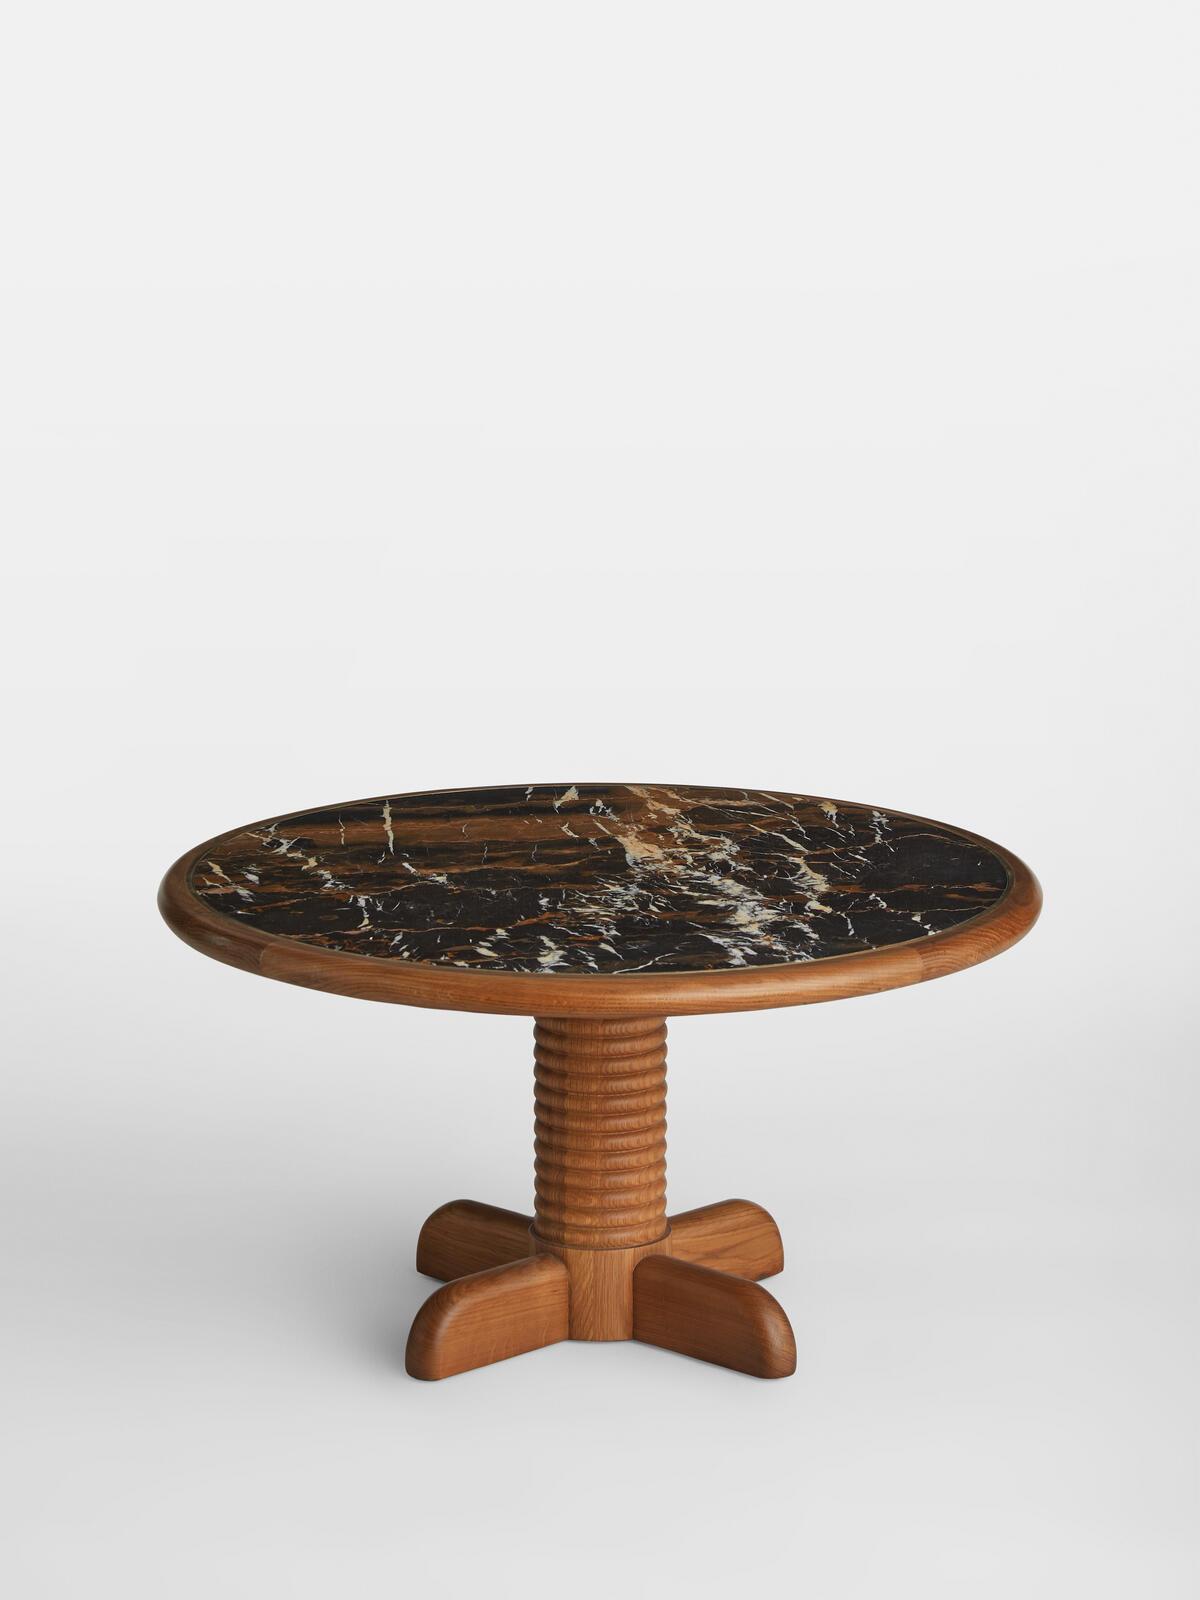 The Fallows Dining Table in Teak and Marble